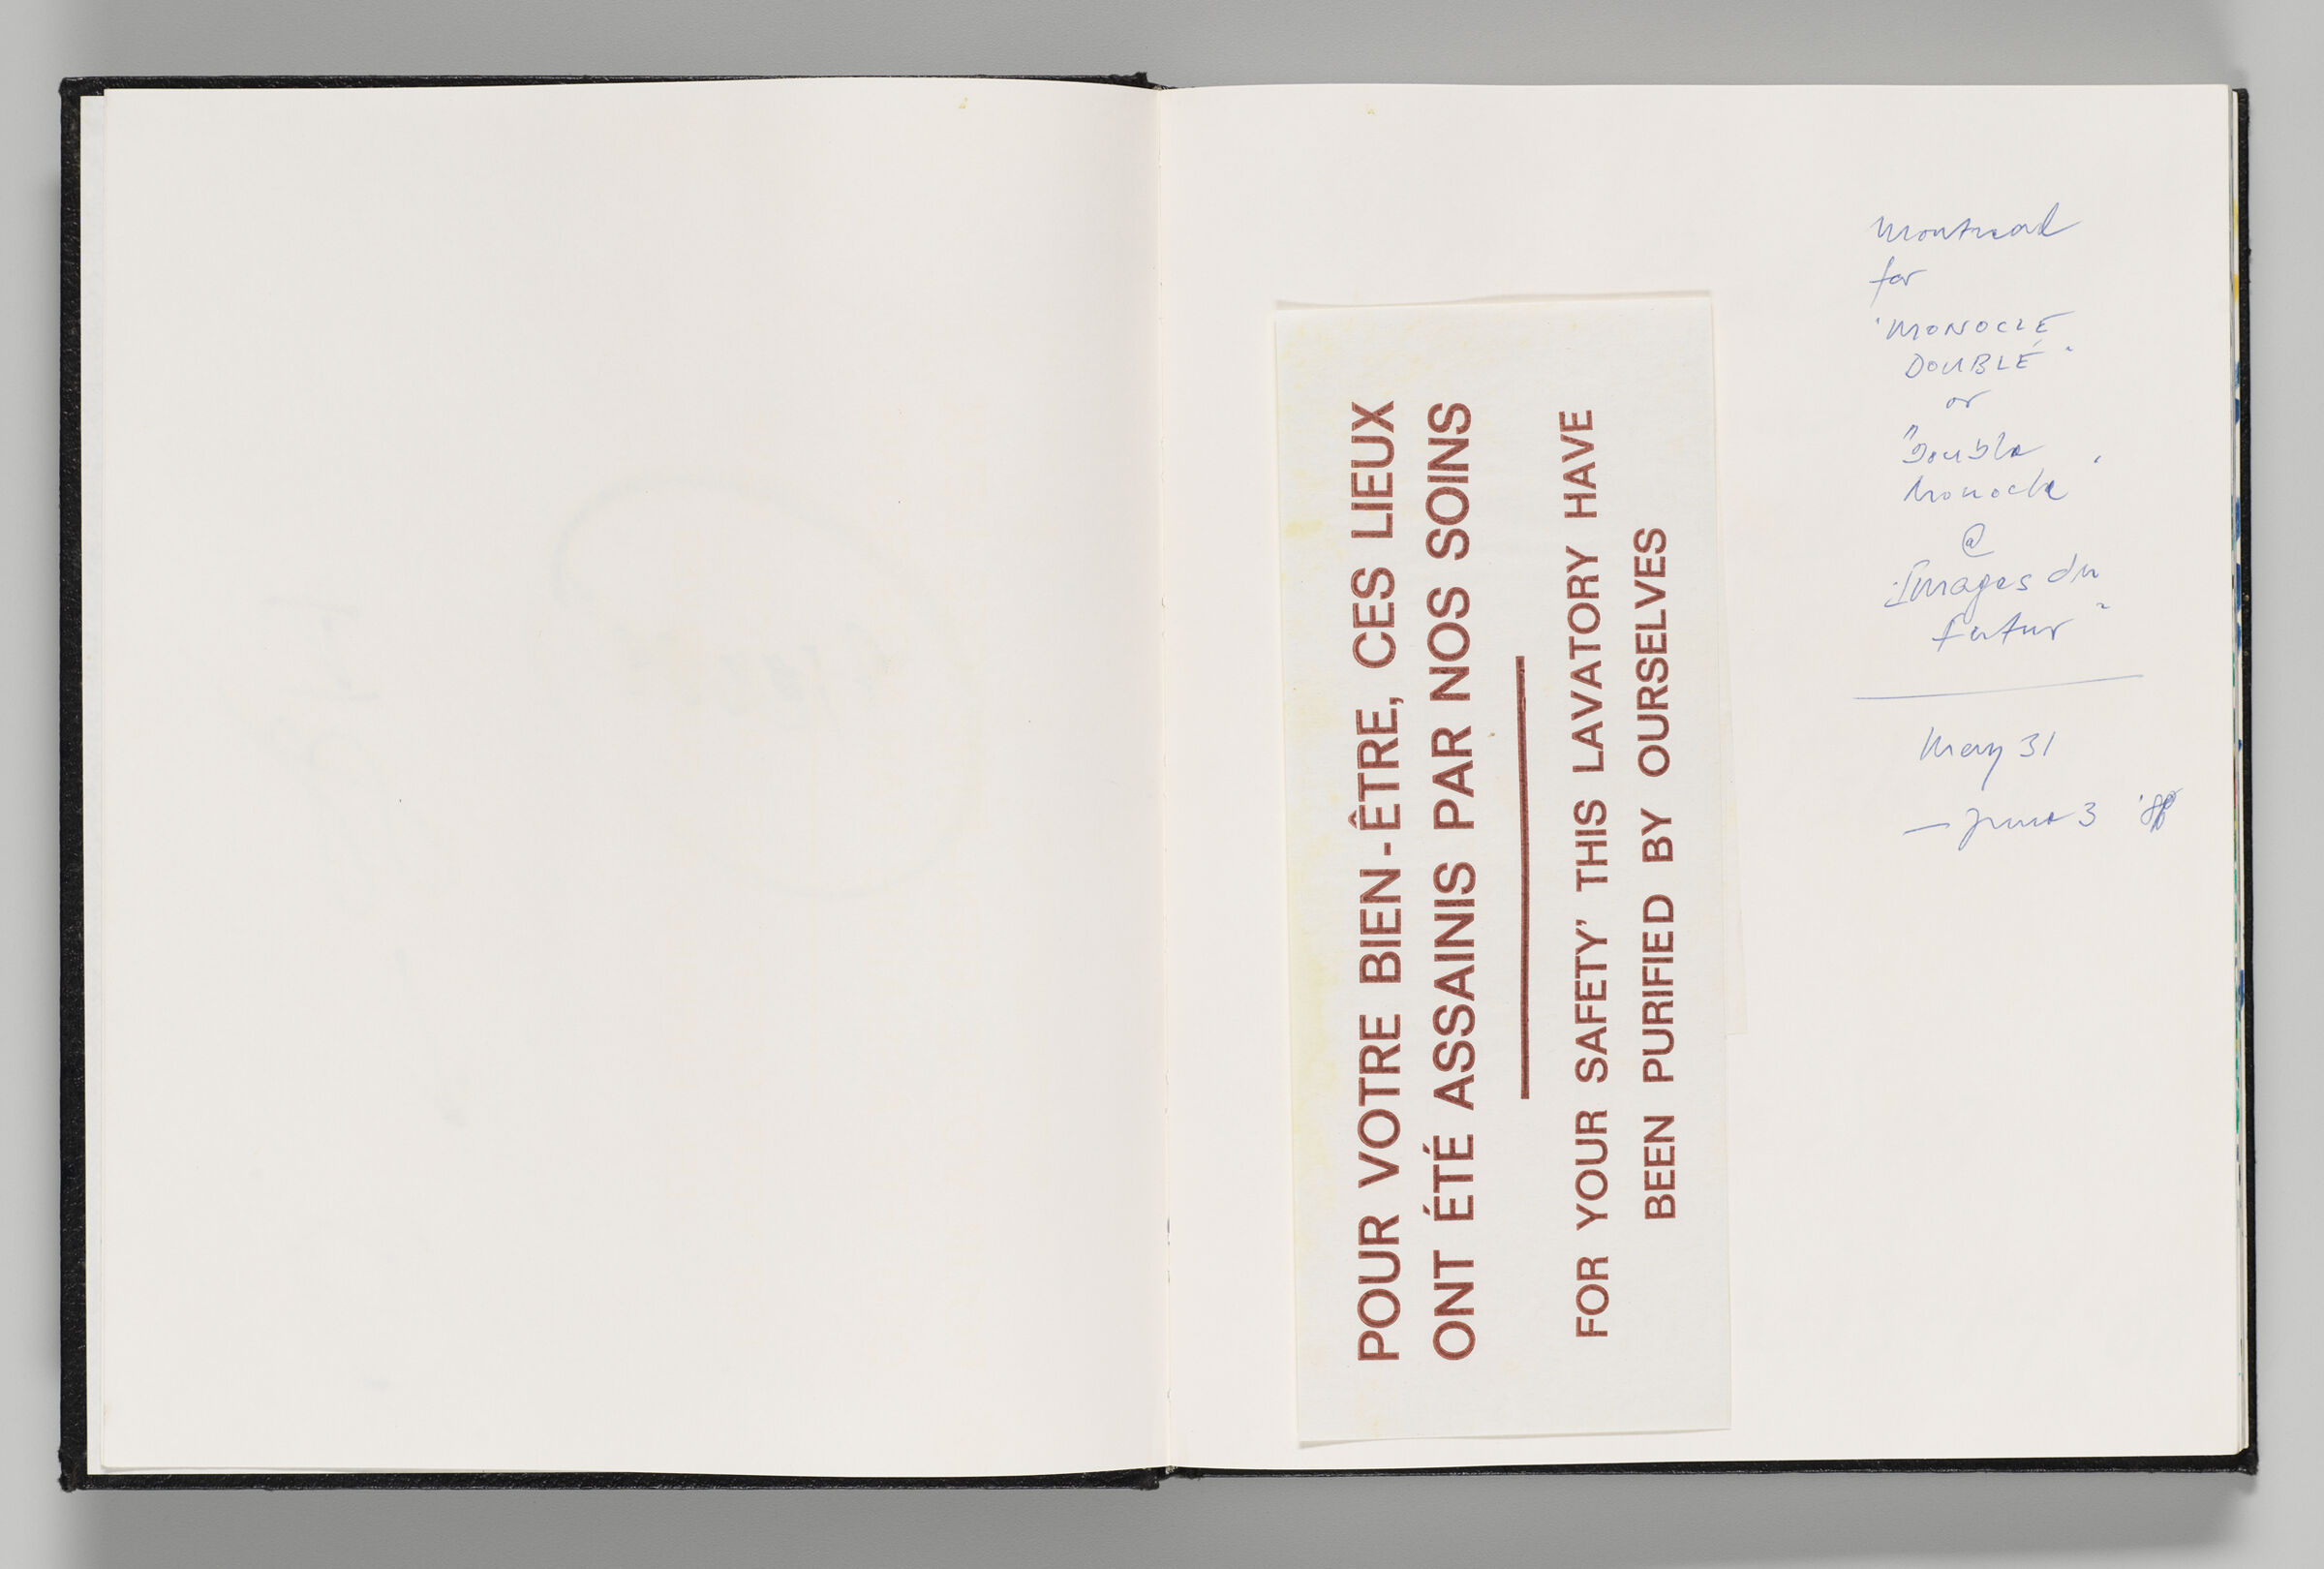 Untitled (Blank, Left Page); Untitled (Adhered Sheet And Notes, Right Page)